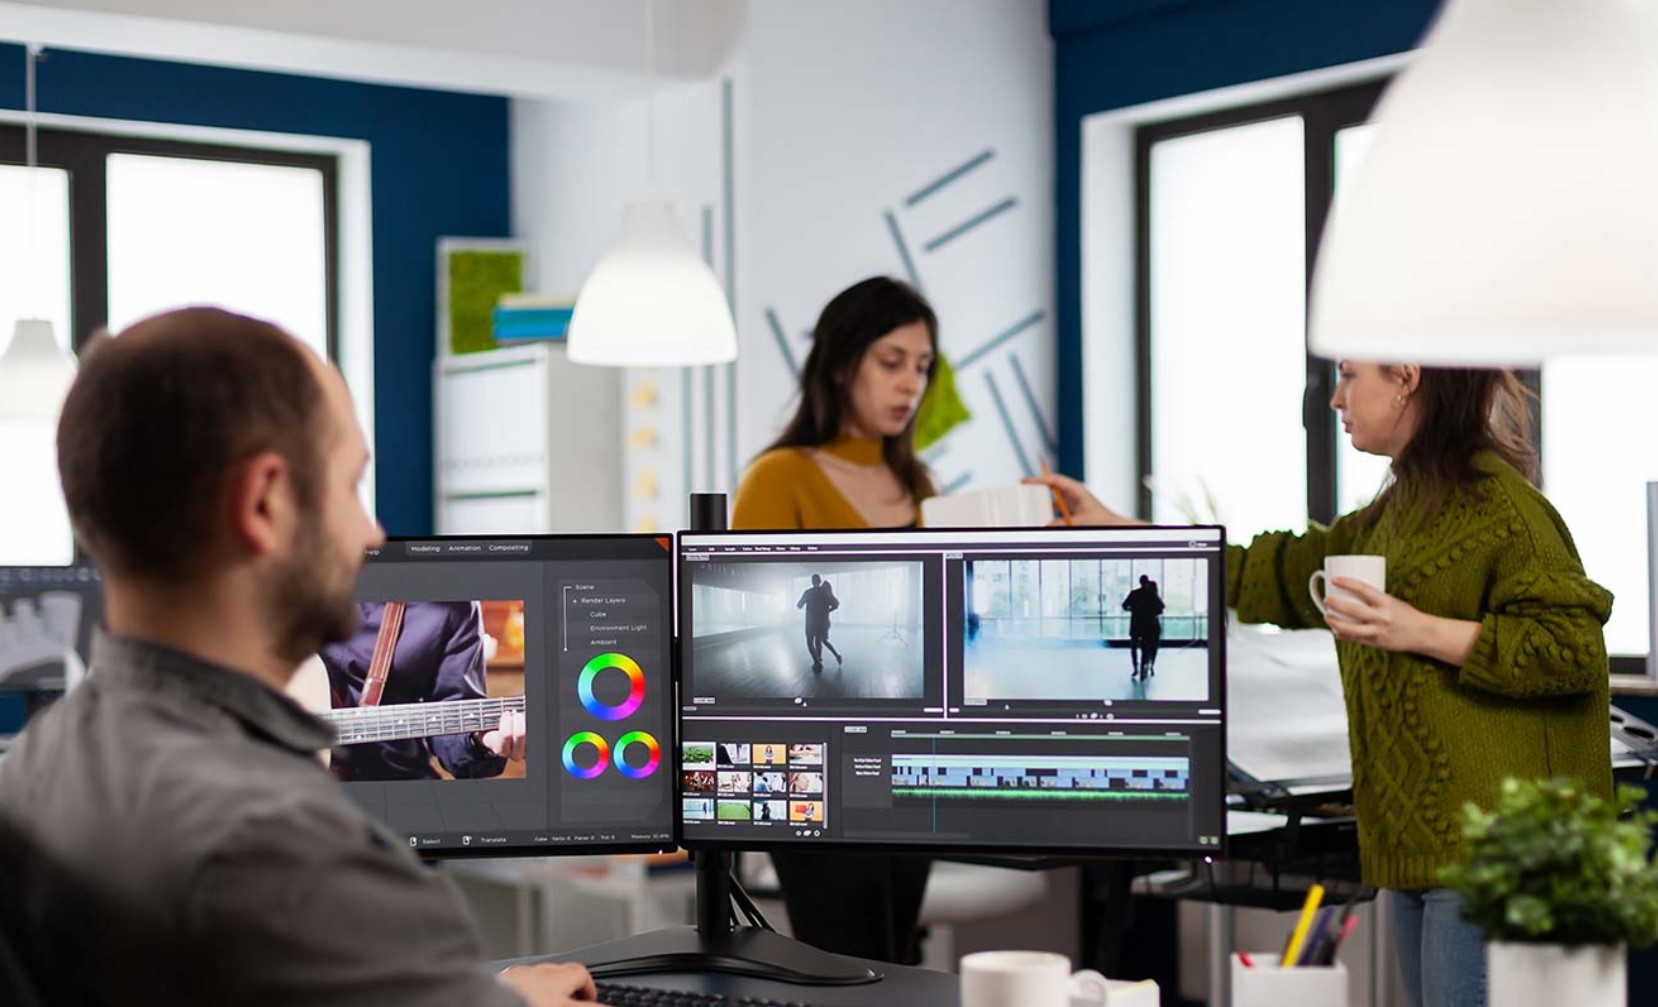 5 Best Free Video Editors: How to Cut Costs on Video Production